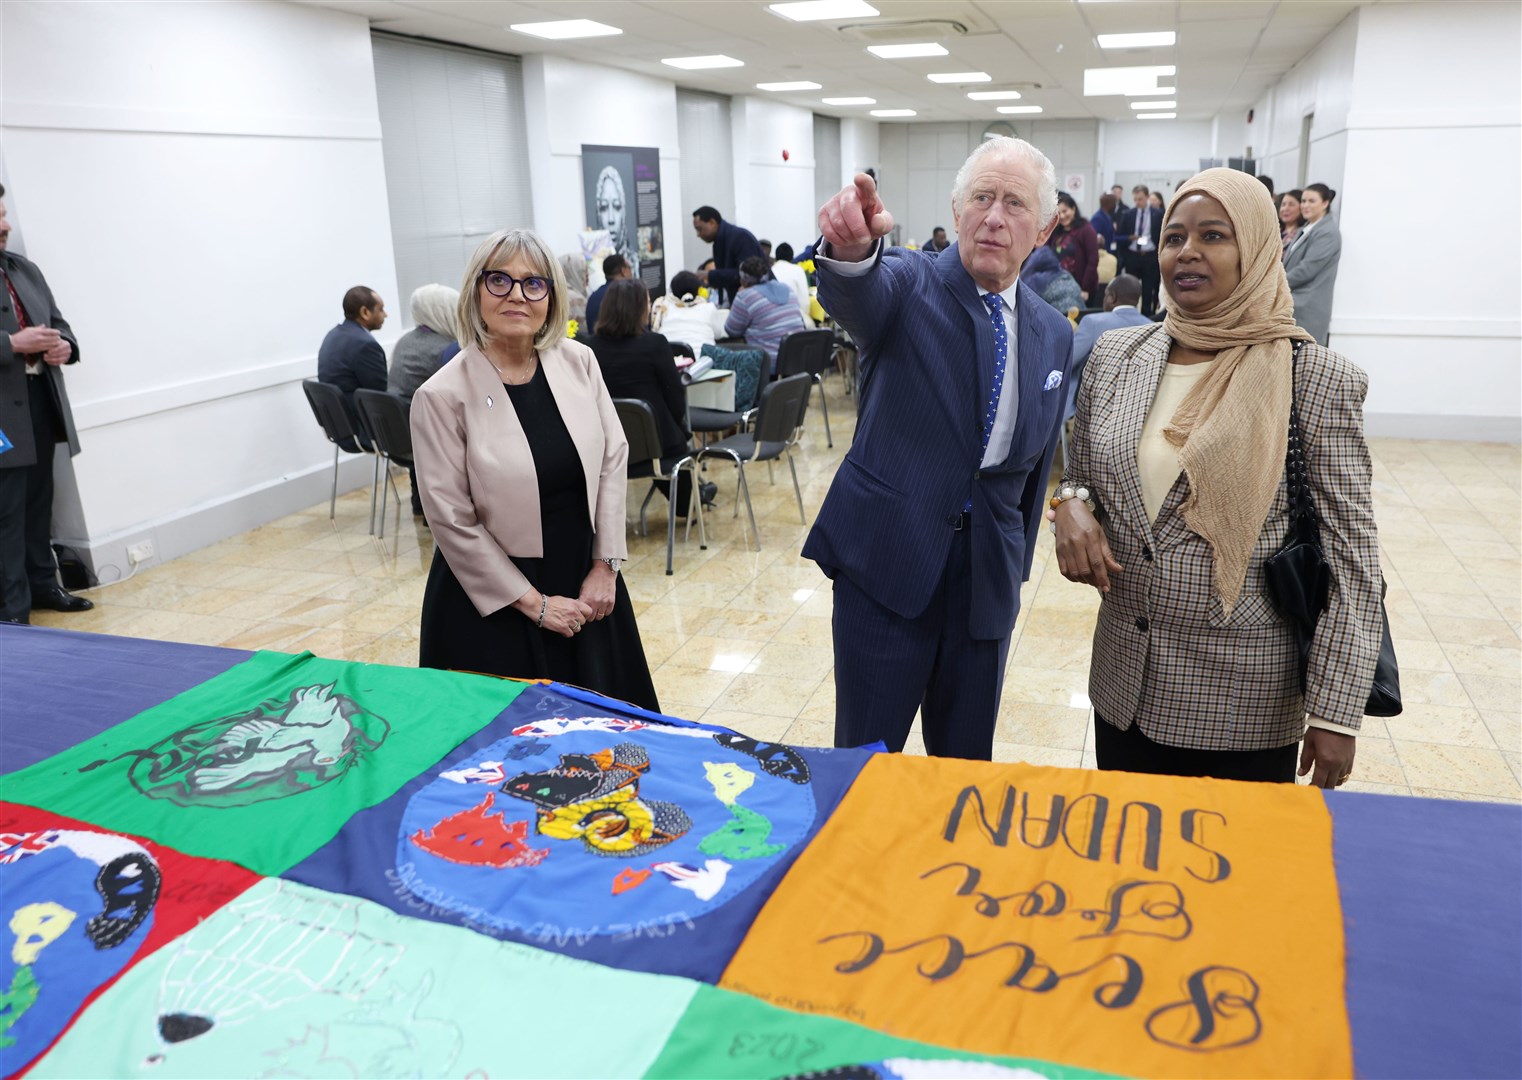 Charles chatted with accountants, NHS consultants and charity workers who have made a new life for themselves in the UK, (Ian Vogler/Daily Mirror/PA)